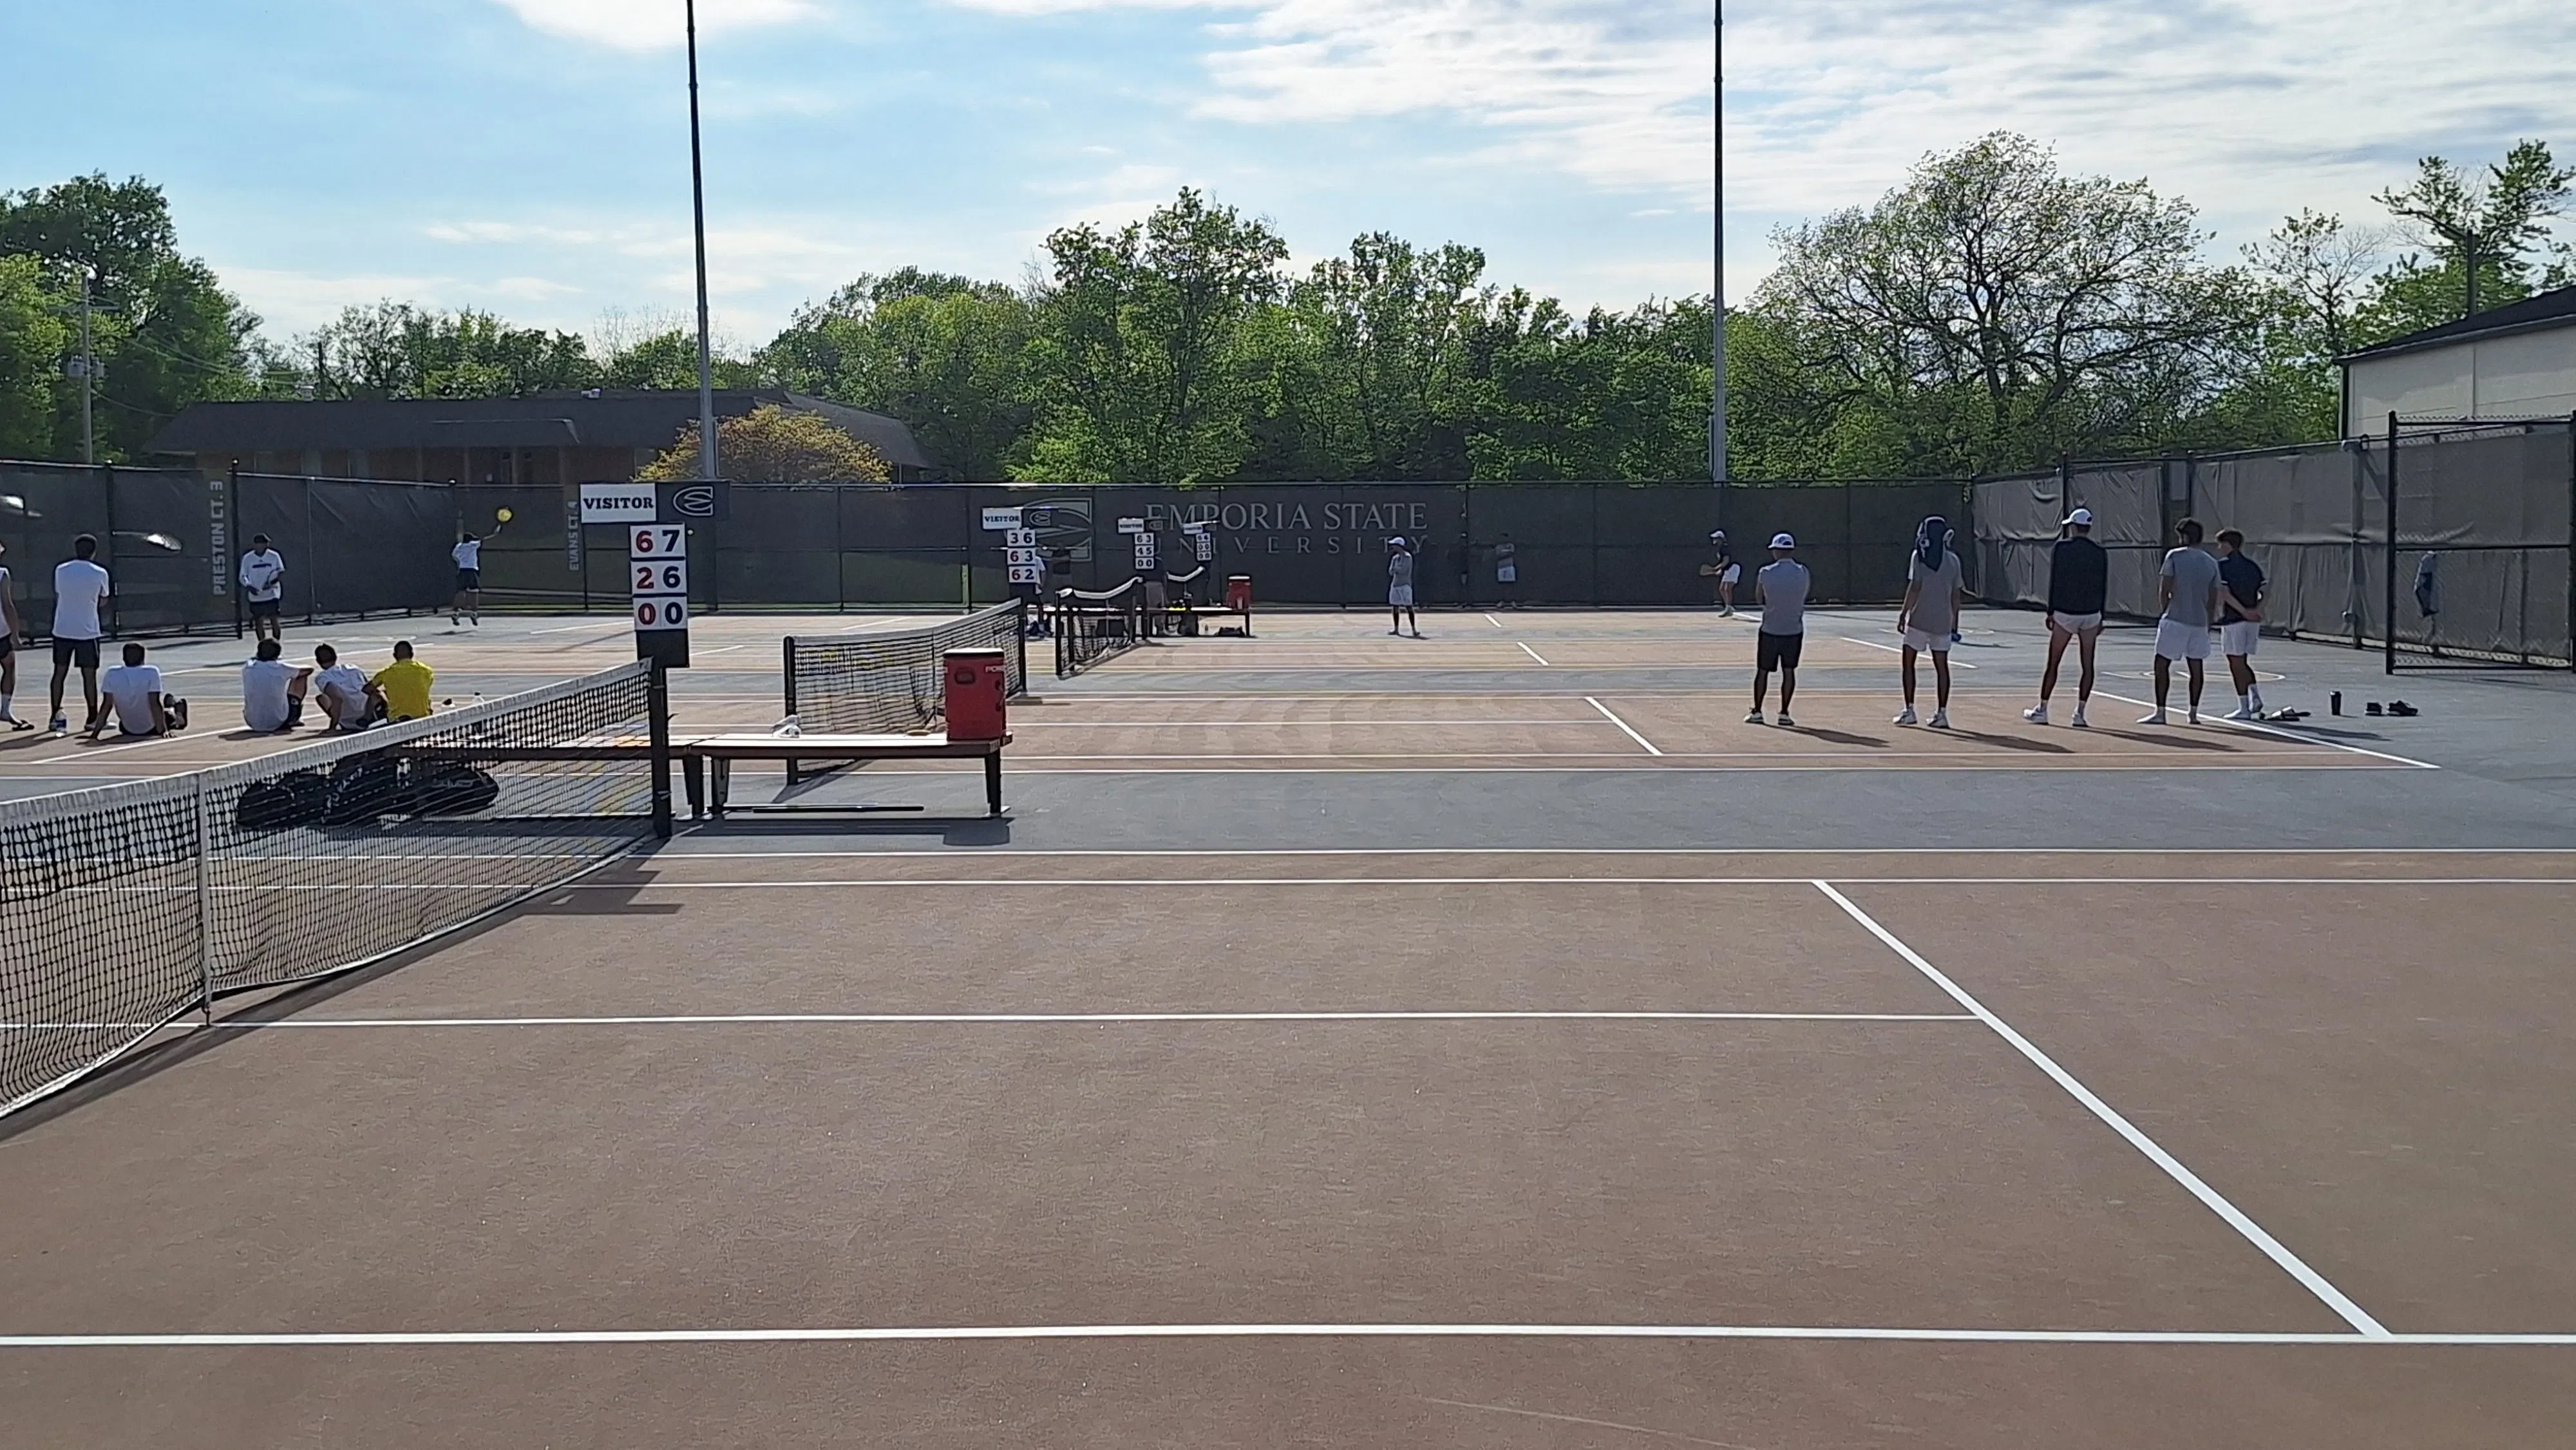 Sarunic Bright Spot for Hornet Tennis in Tussle Loss